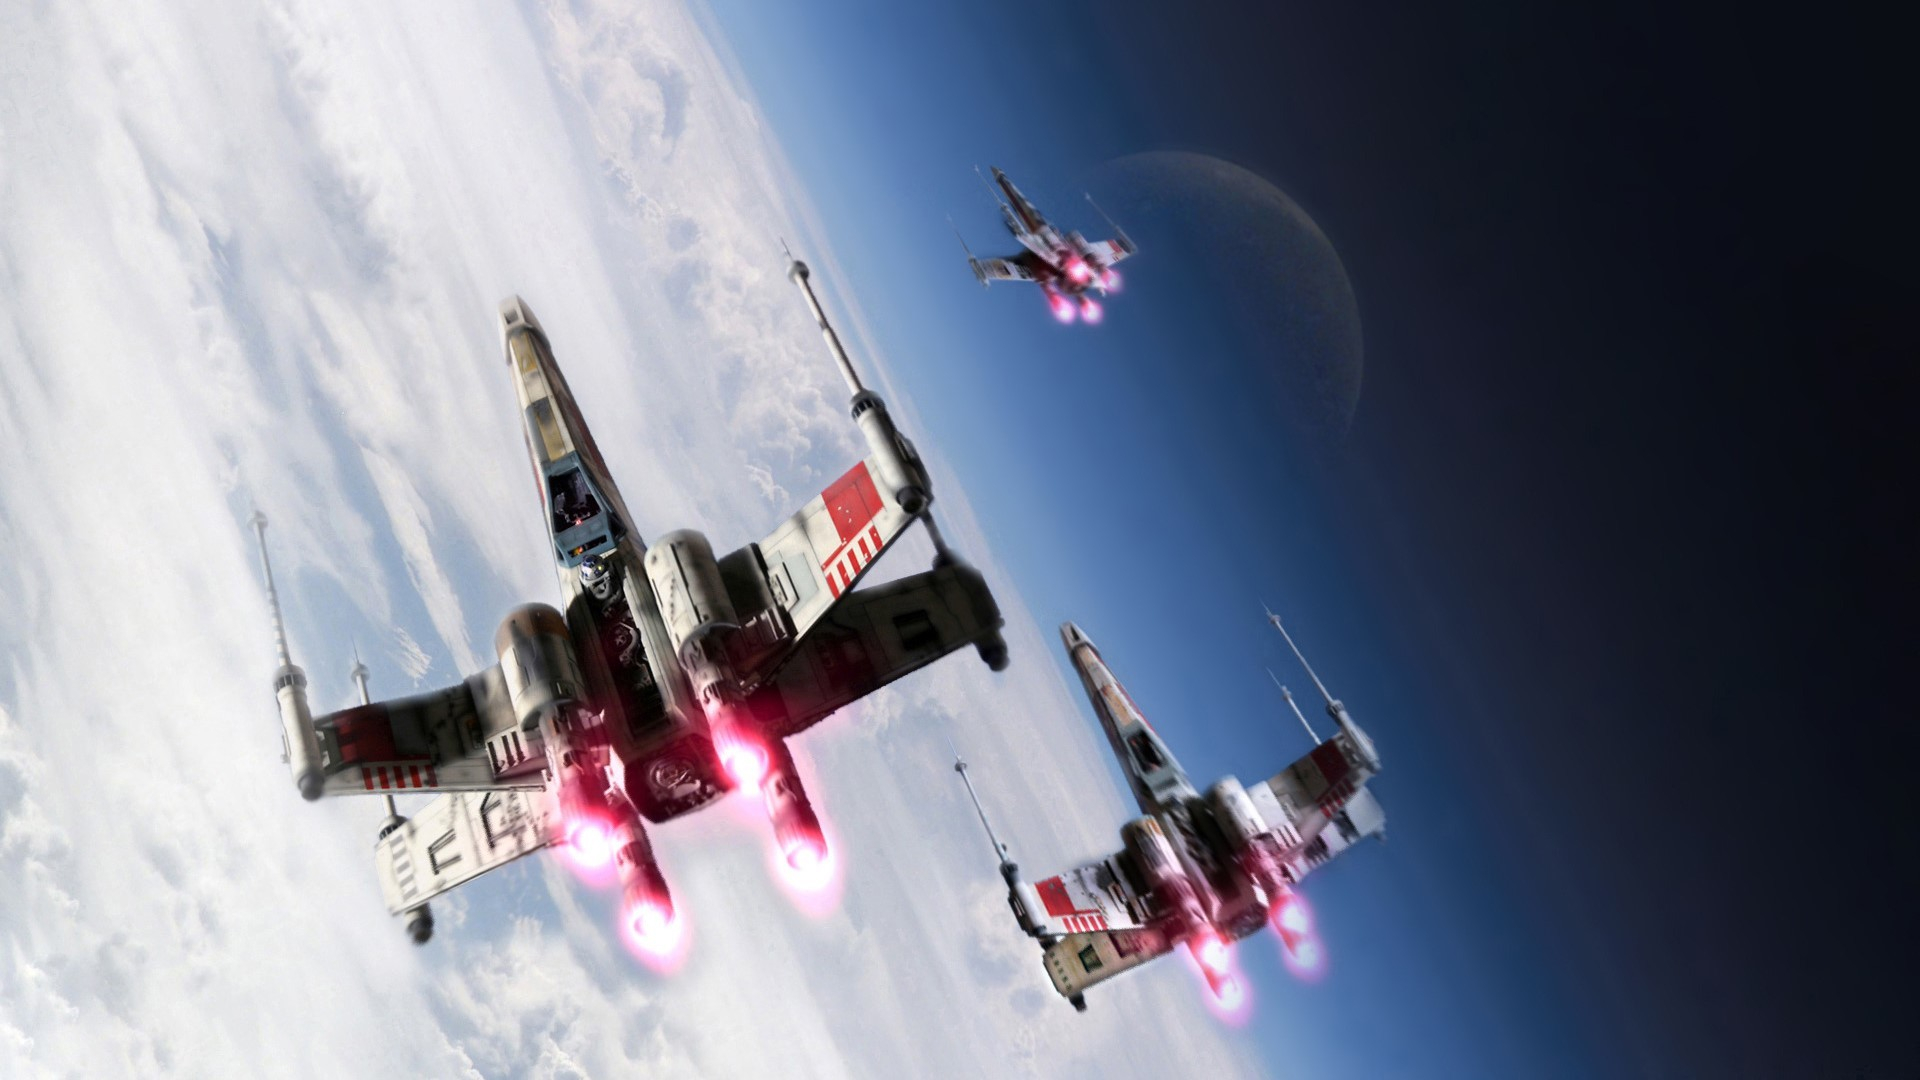 1920x1080 Wallpaper : sports, Star Wars, X wing, Rebel Alliance, atmosphere of earth, extreme sport, winter sport, parachuting, freestyle skiing vexel78 122406 HD Wallpapers